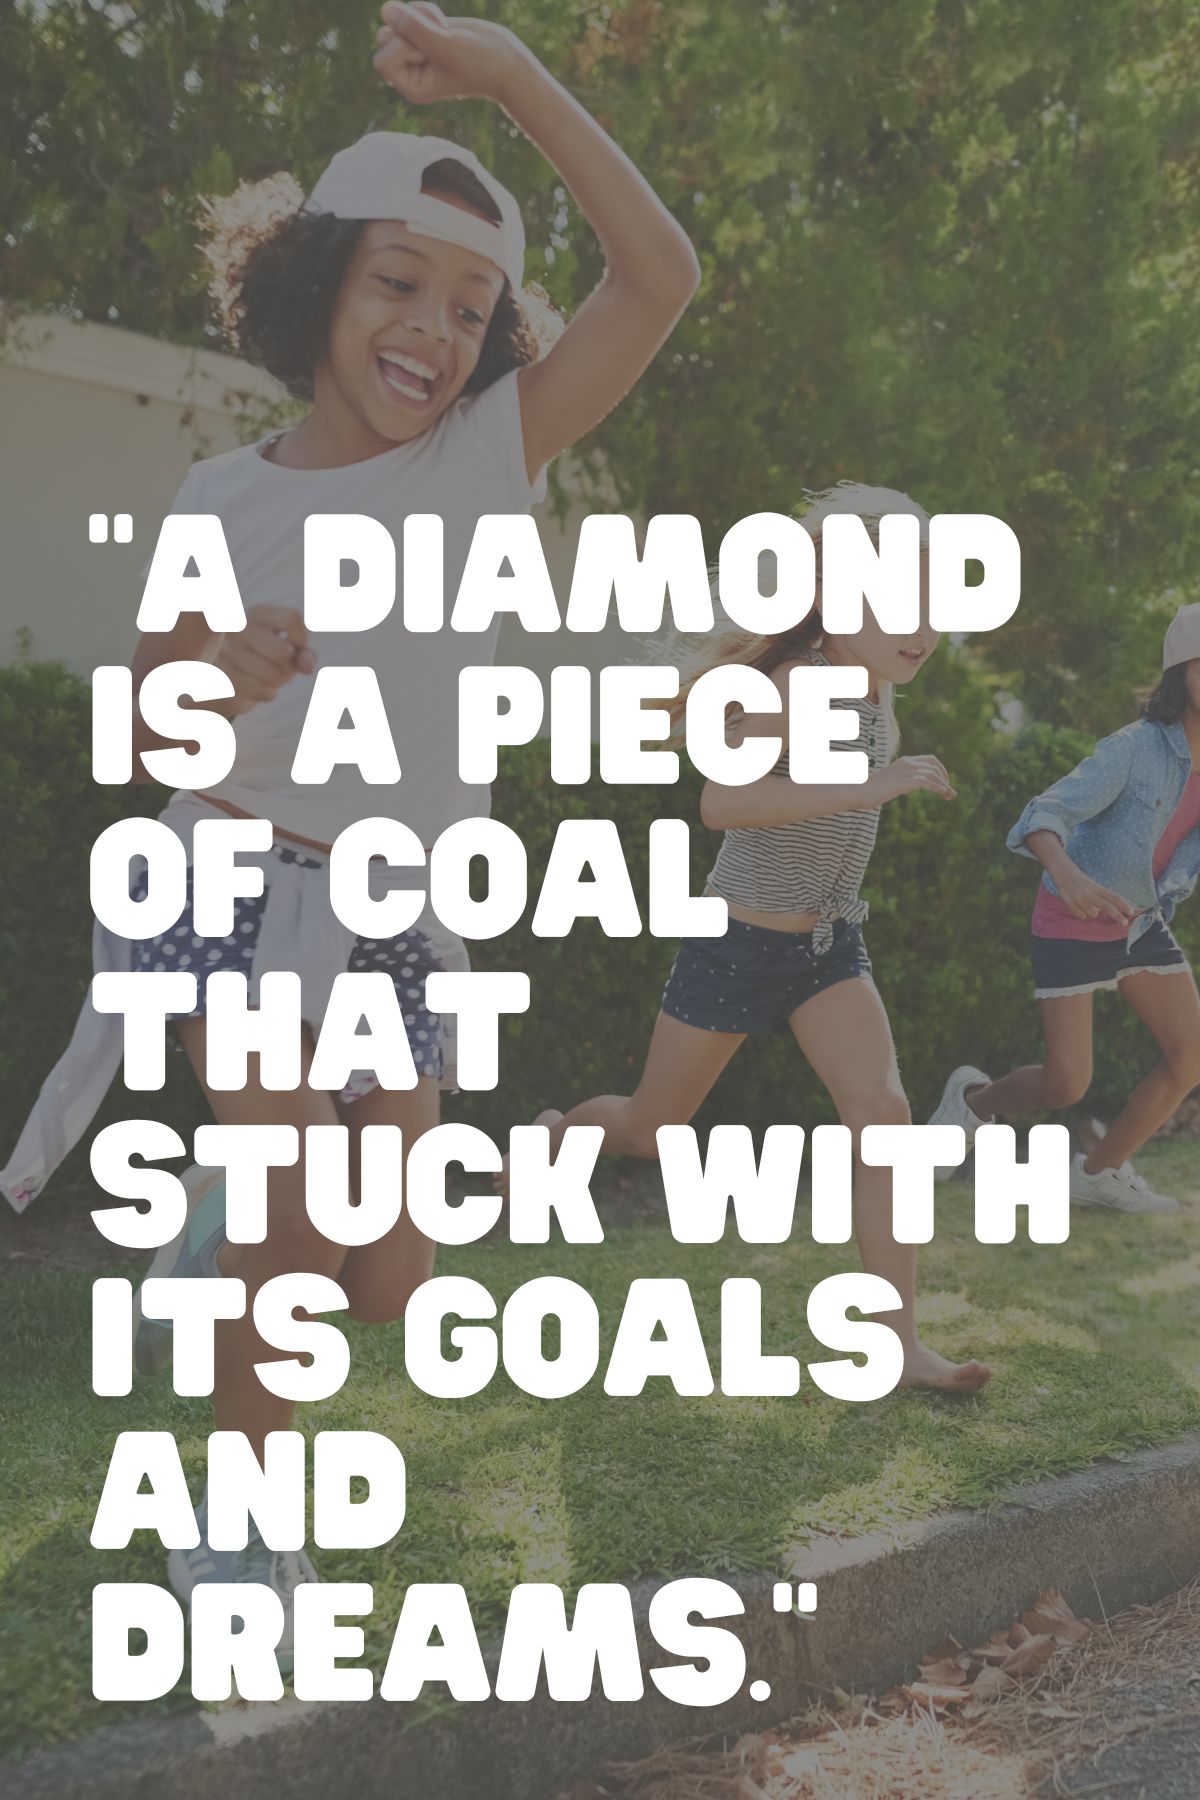 "A diamond is a piece of coal that stuck with its goals and dreams." - Unknown confidence quote